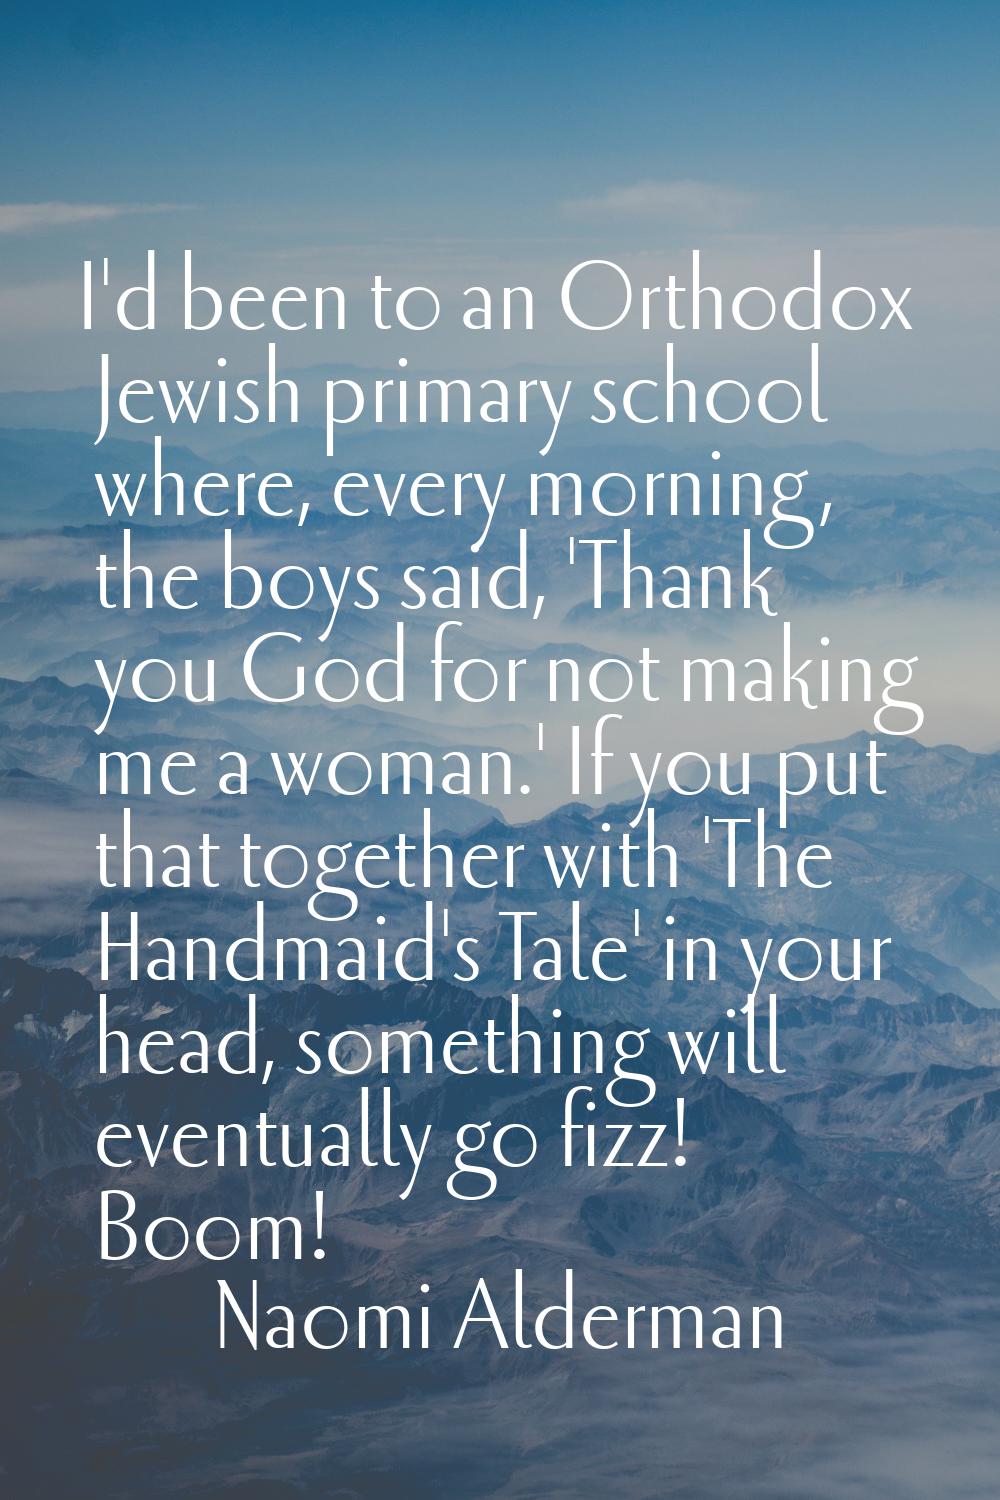 I'd been to an Orthodox Jewish primary school where, every morning, the boys said, 'Thank you God f